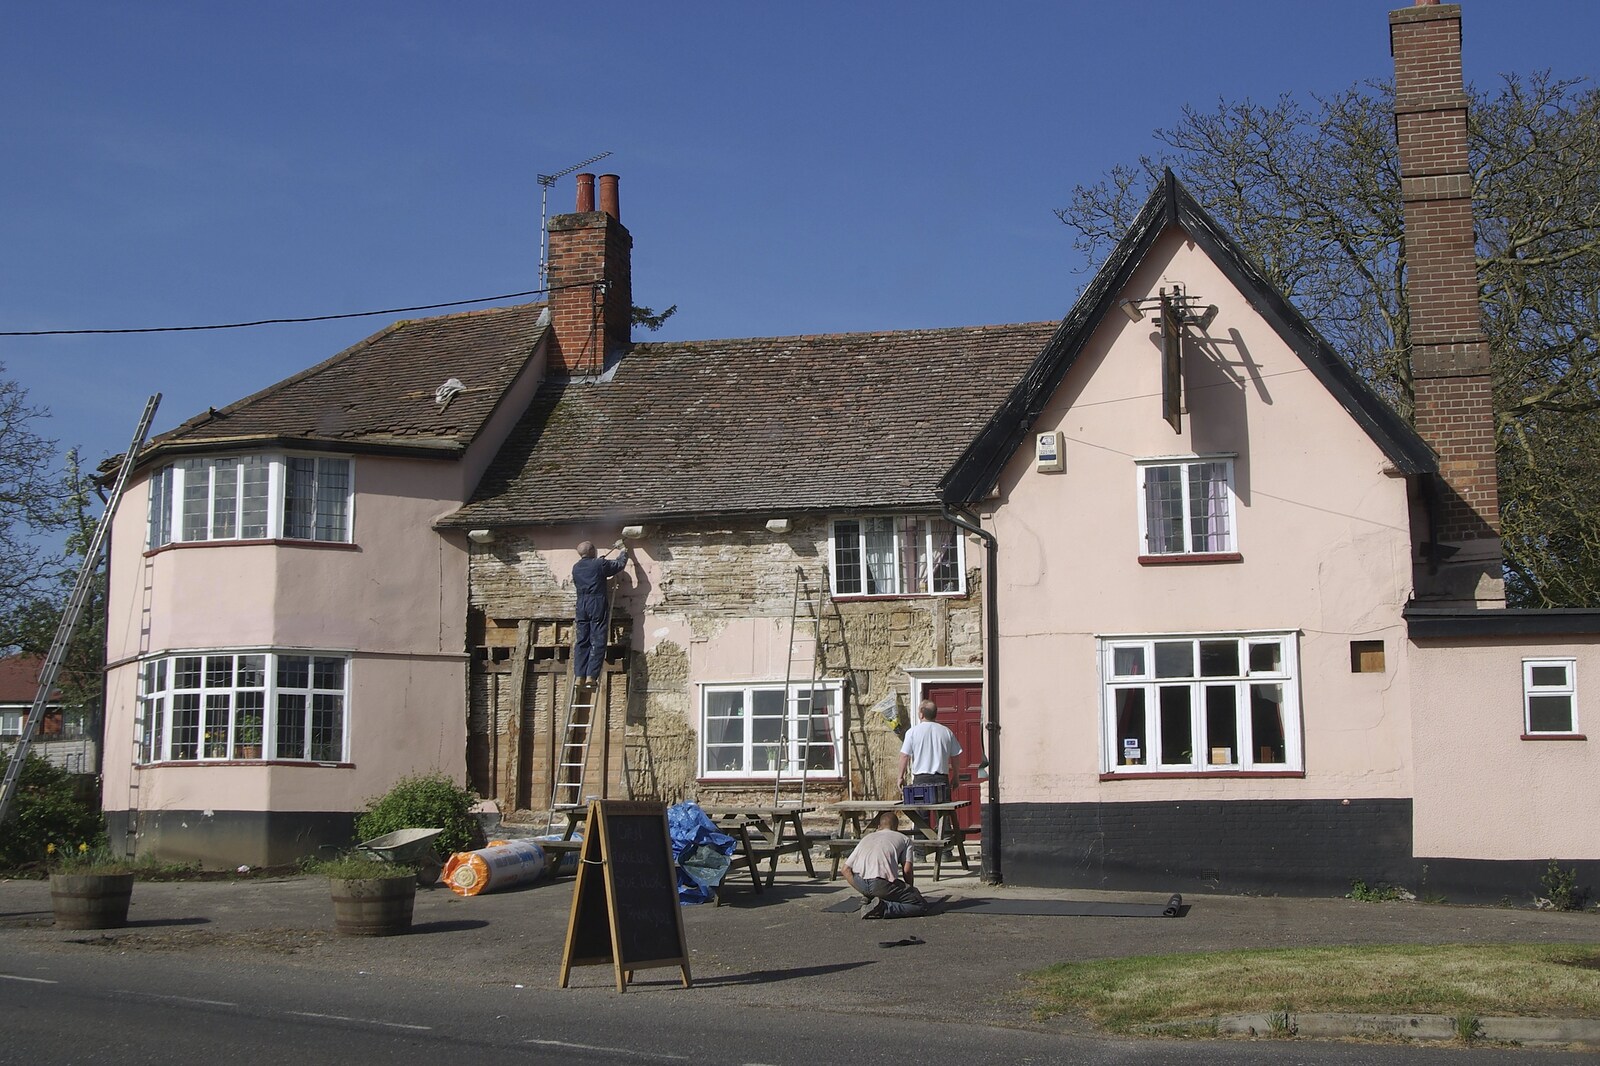 The White Horse at Finningham gets its walls repaired from Science Park Demolition, Bjarne Stroustrup, and Taptu/Qualcomm Miscellany, Cambridge - 29th April 2007